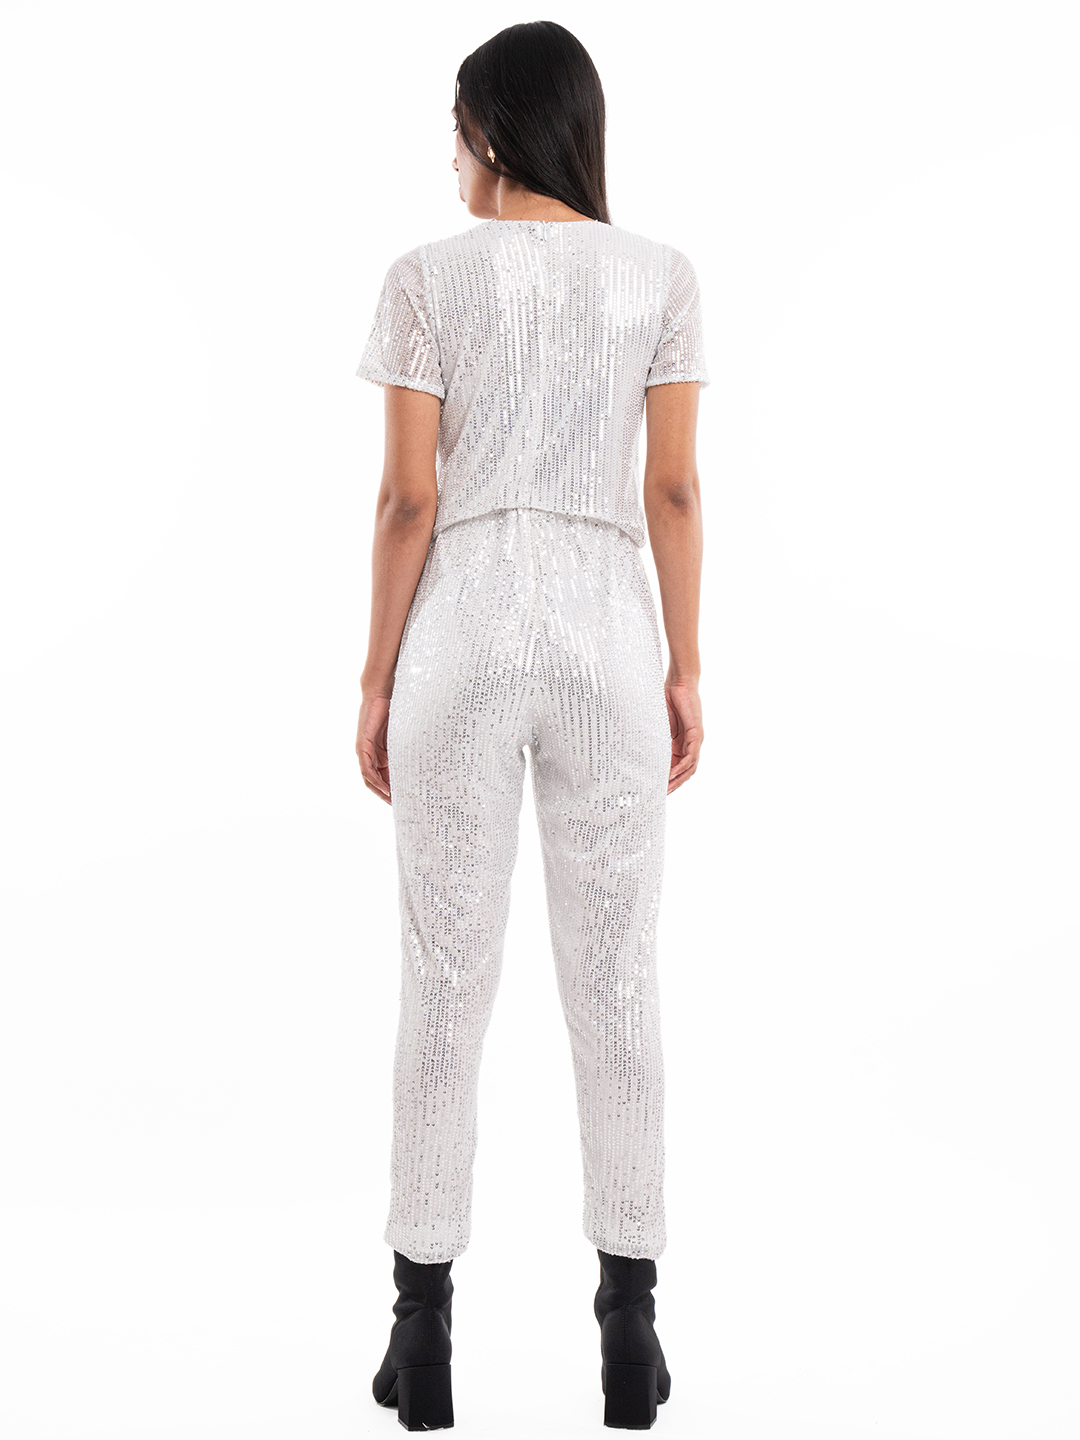 Bling it on Jumpsuit White -1